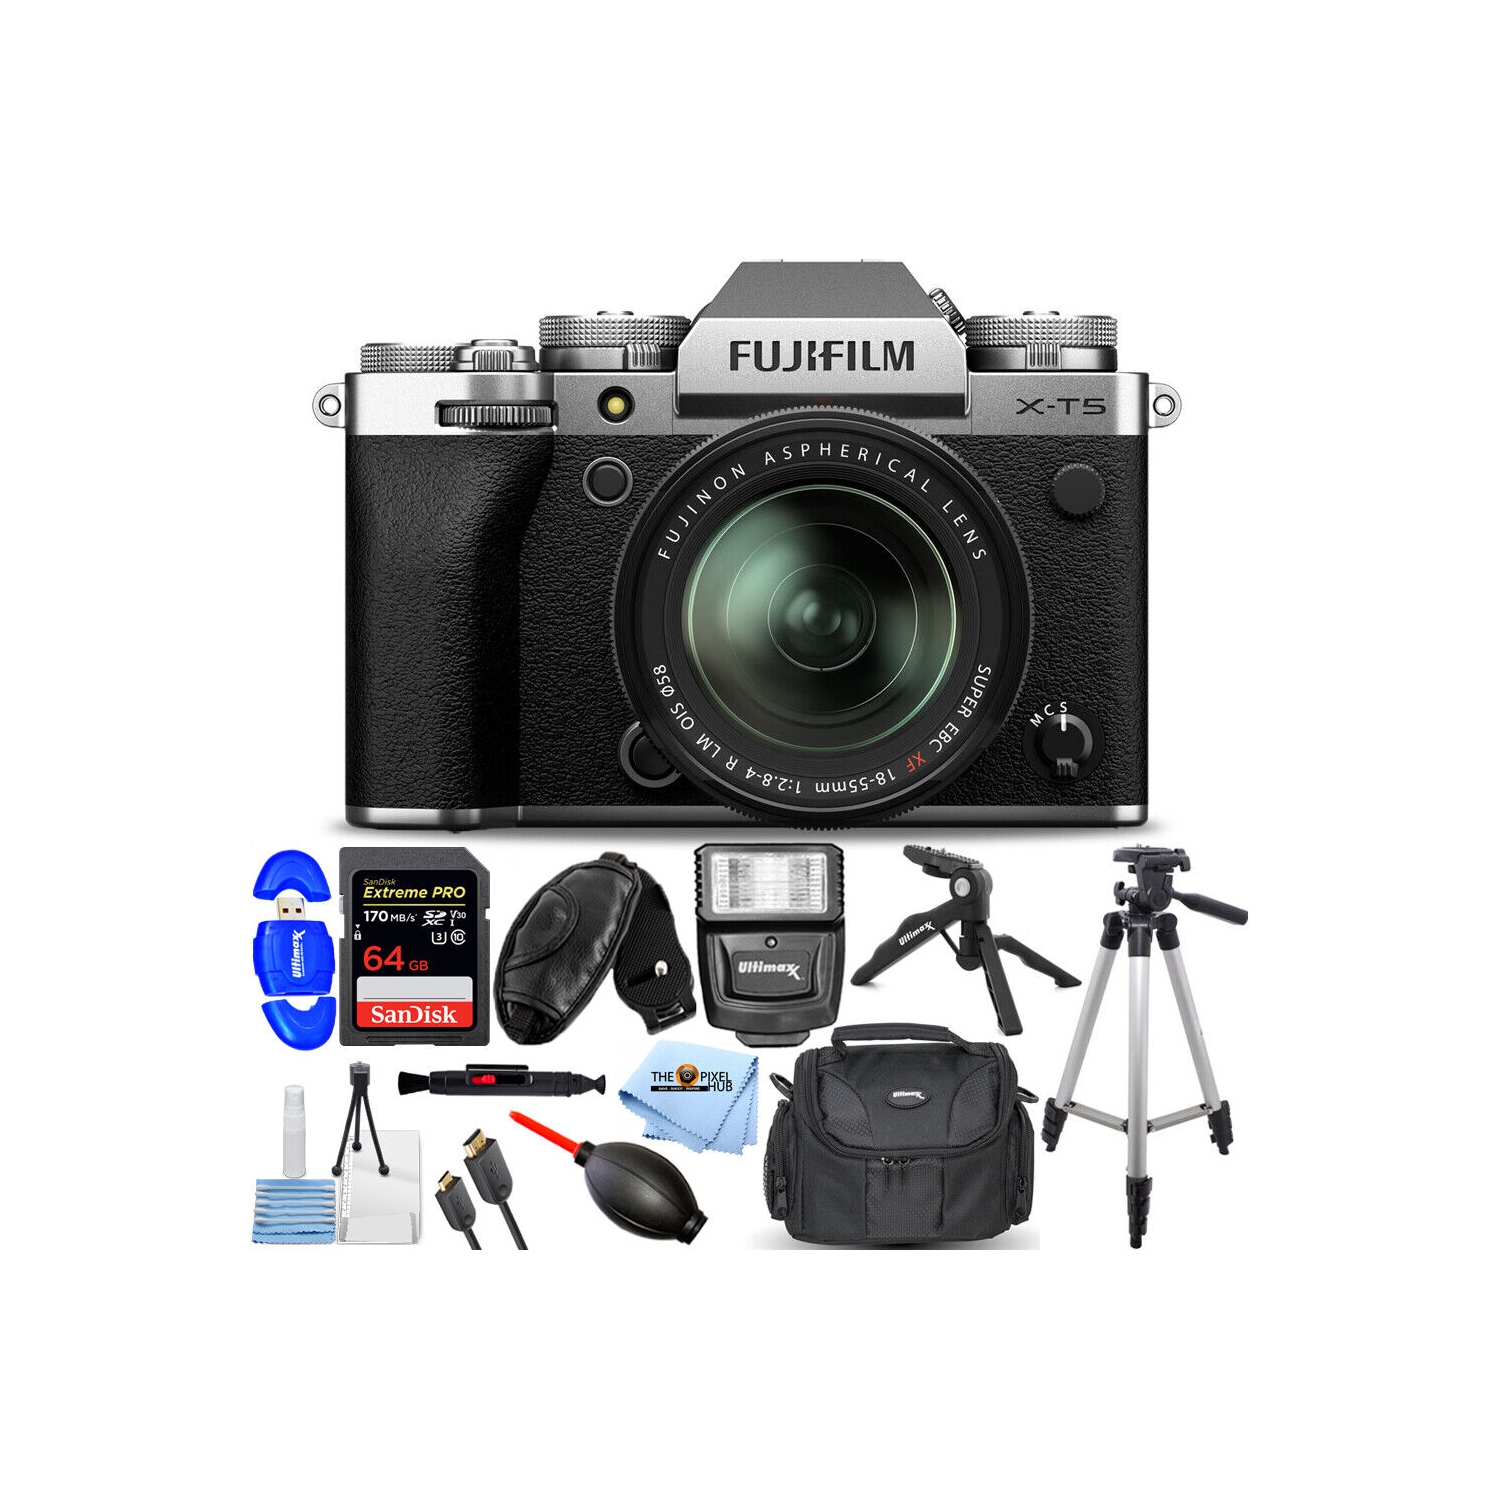 FUJIFILM X-T5 Mirrorless Camera with 18-55mm Lens Silver - 12PC Accessory Bundle